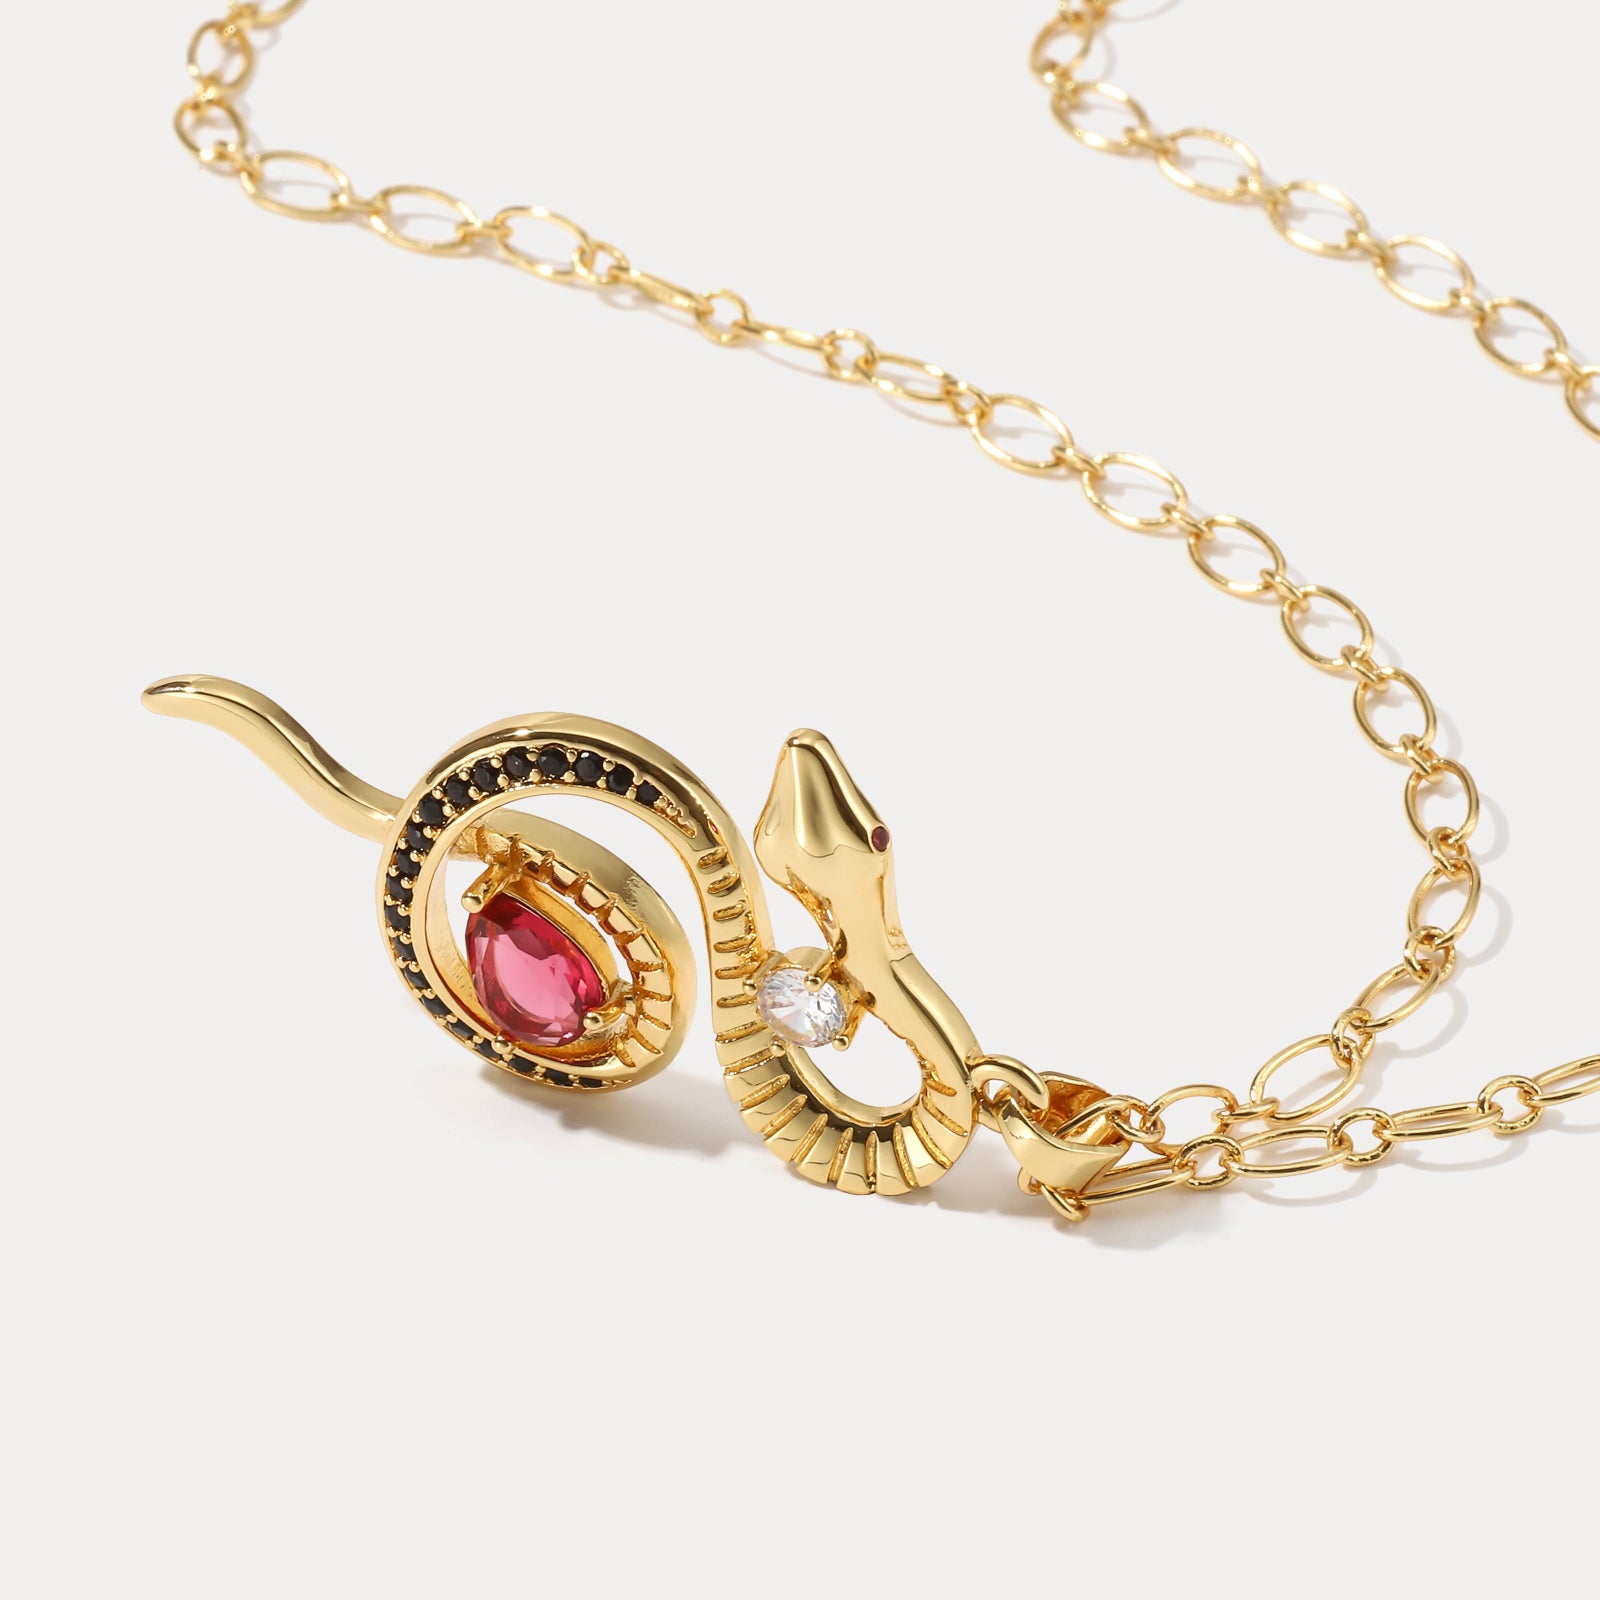 Ruby Snake Long Chain Necklace